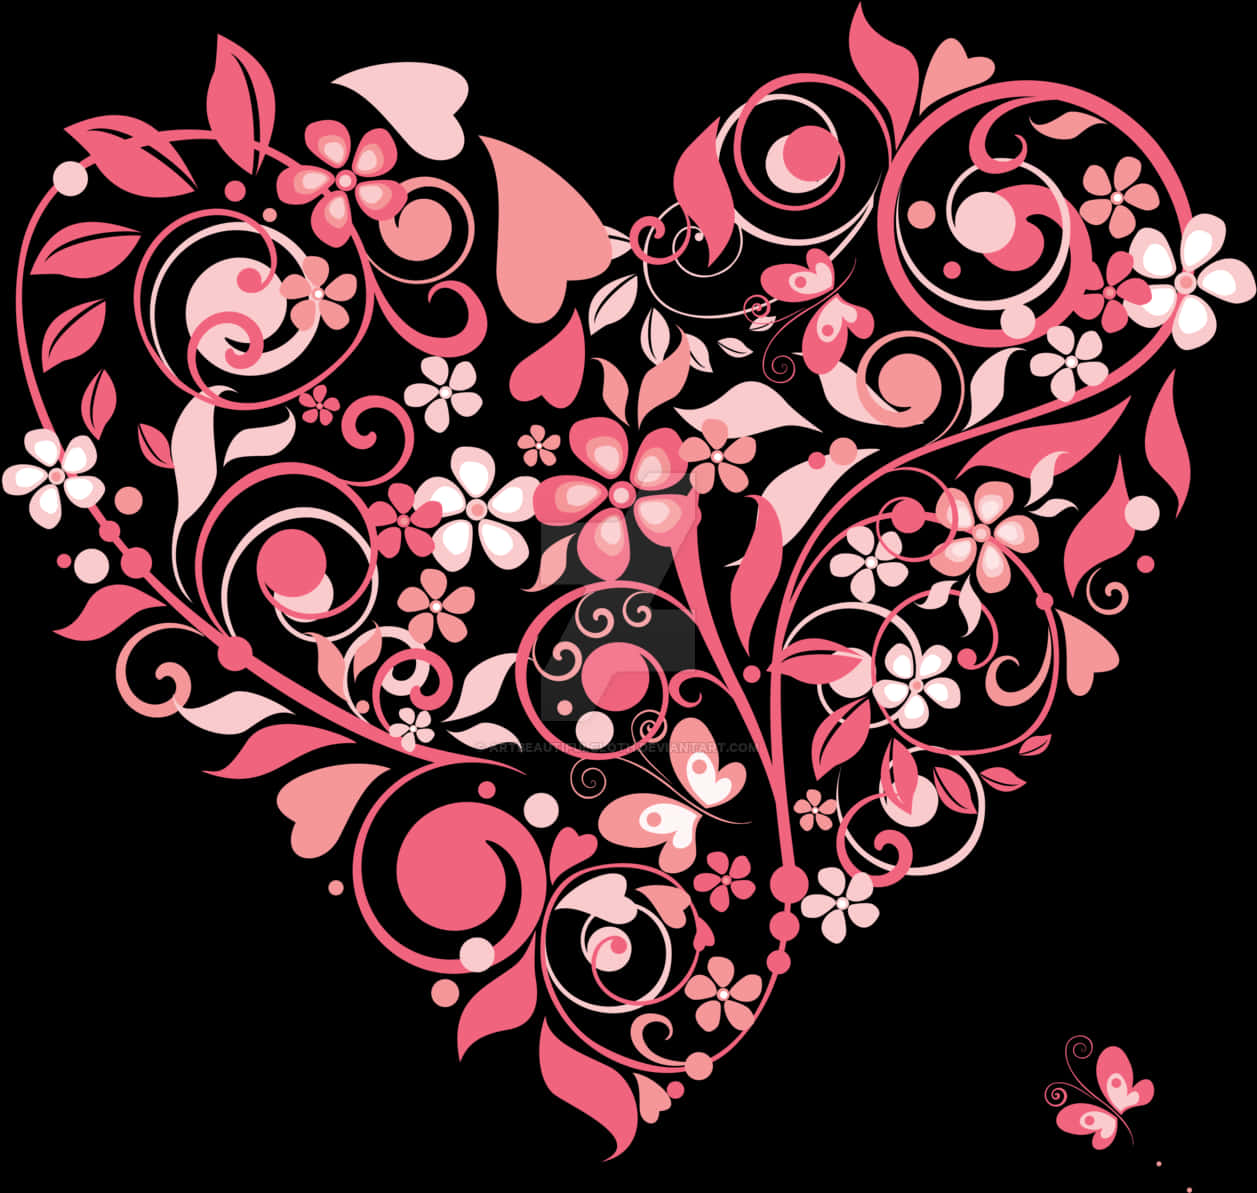 A Heart Shaped Floral Design